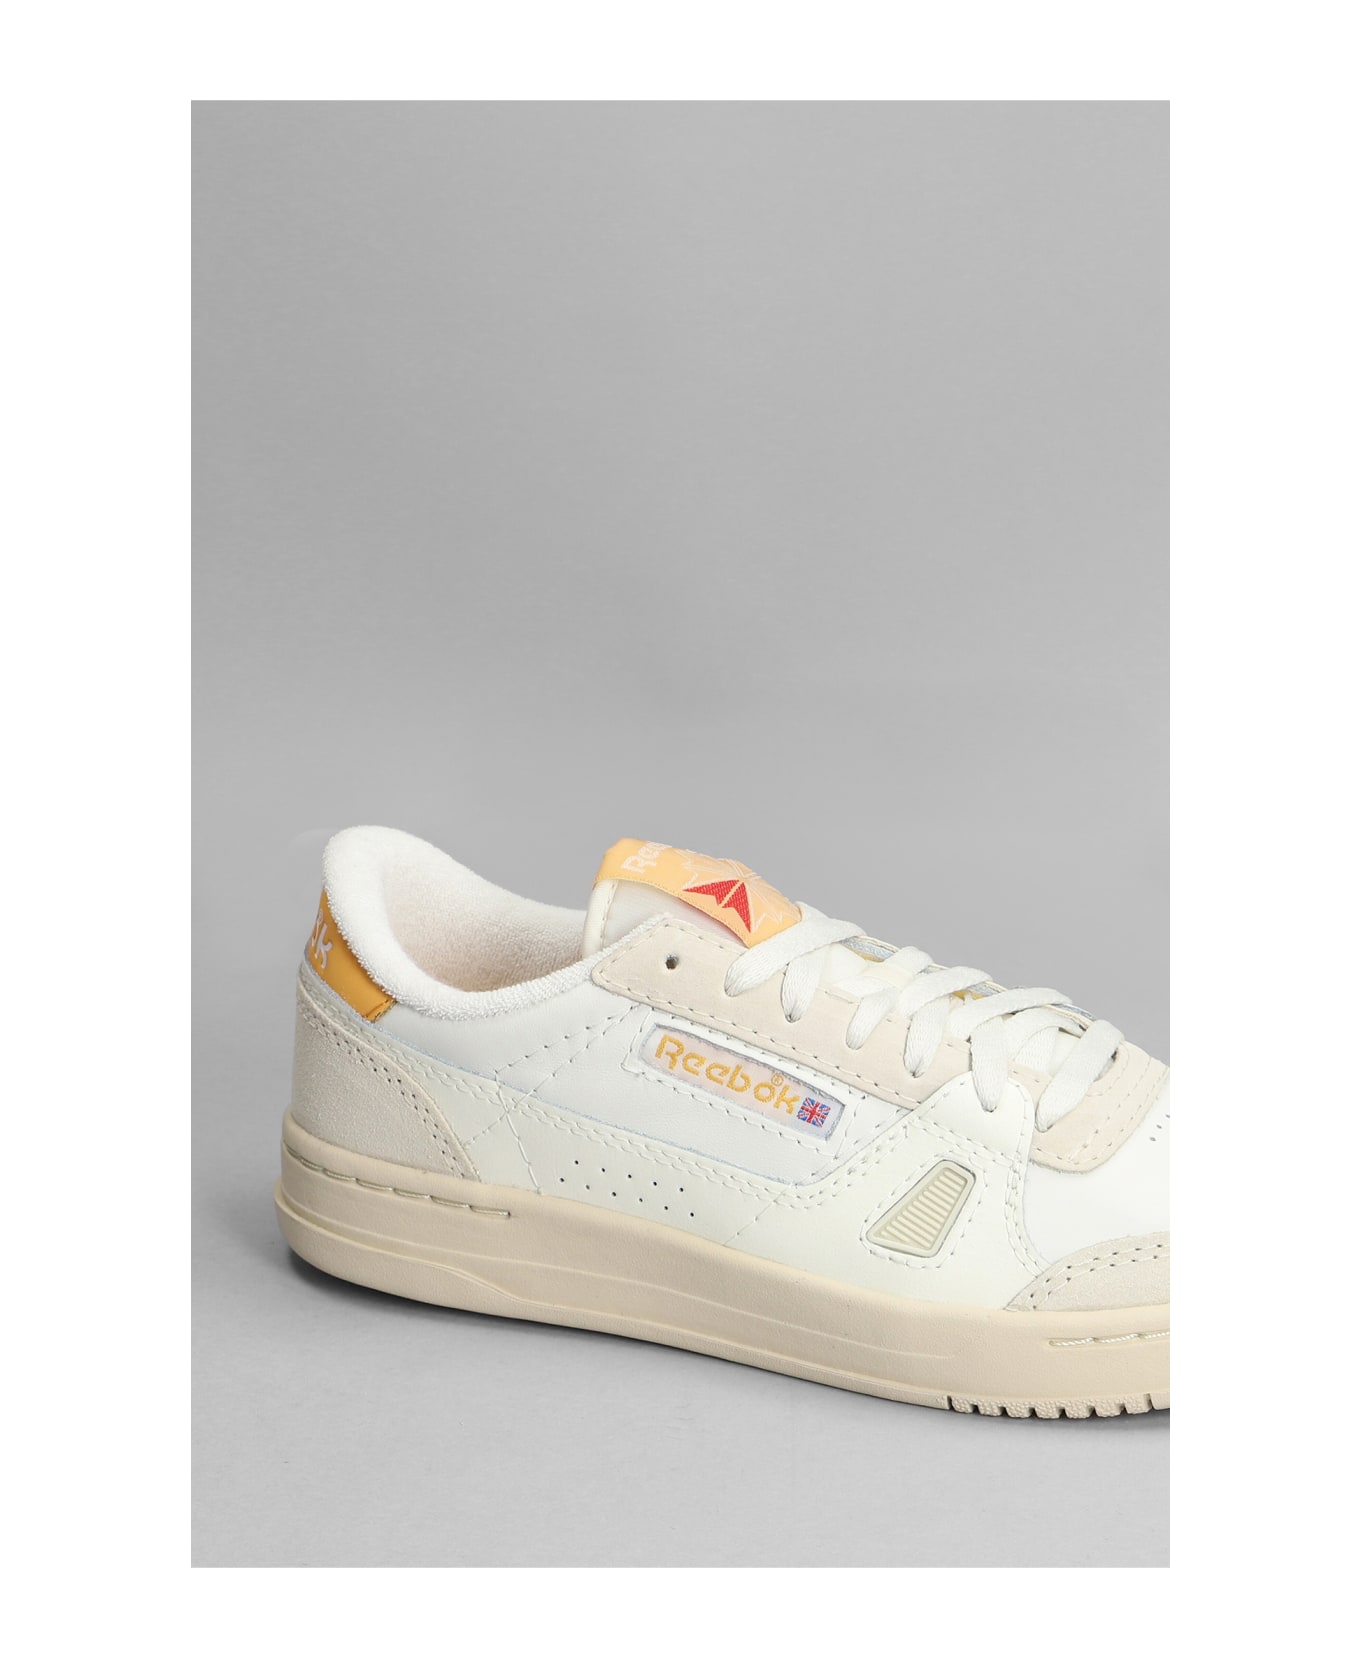 Reebok Lt Court Sneakers In White Leather - Multicolour